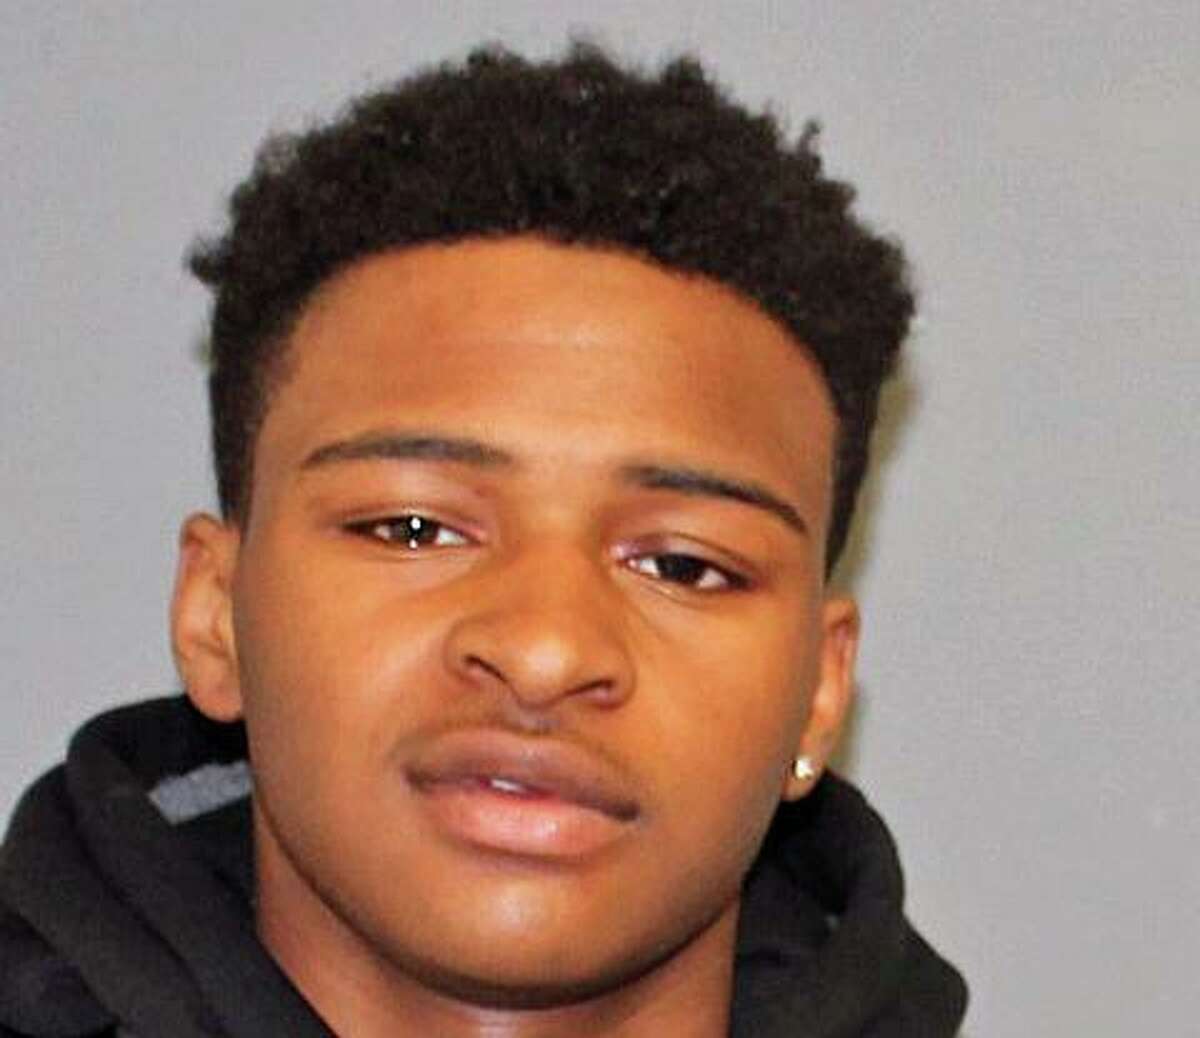 Nehemian Coates, 18, of Waterbury, was charged with third-degree larceny, criminal attempt at third-degree burglary, interfering with officers, simple trespass and operating a motor vehicle under suspension.